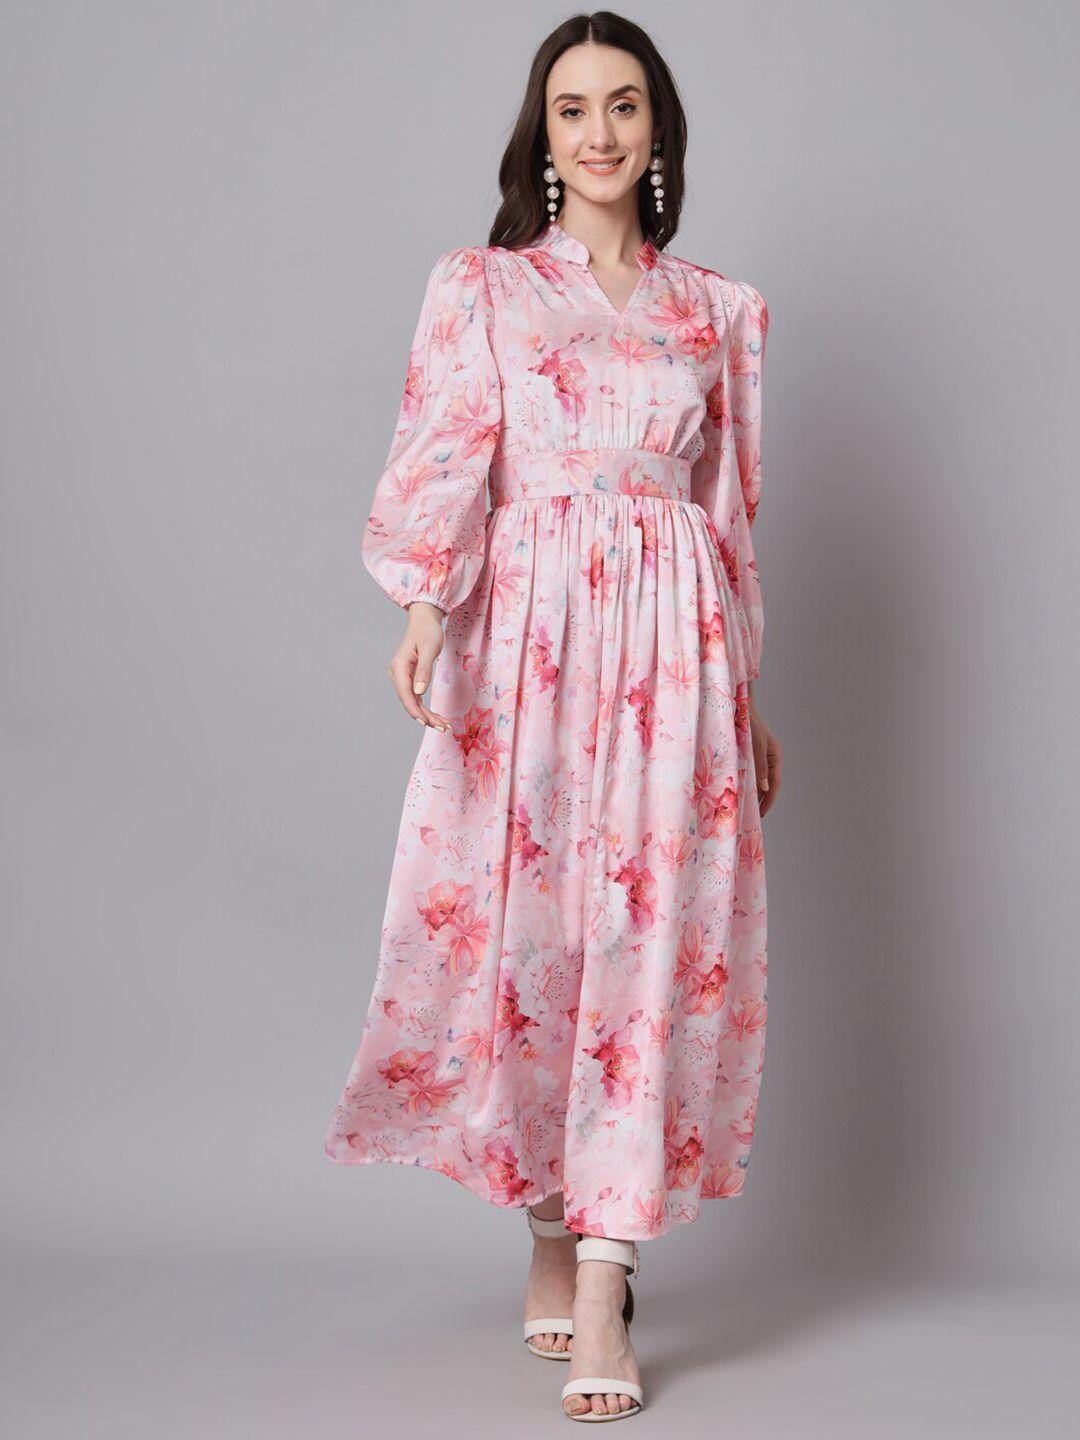 beyound size - the dry state plus size floral printed poly silk fit & flare maxi dress